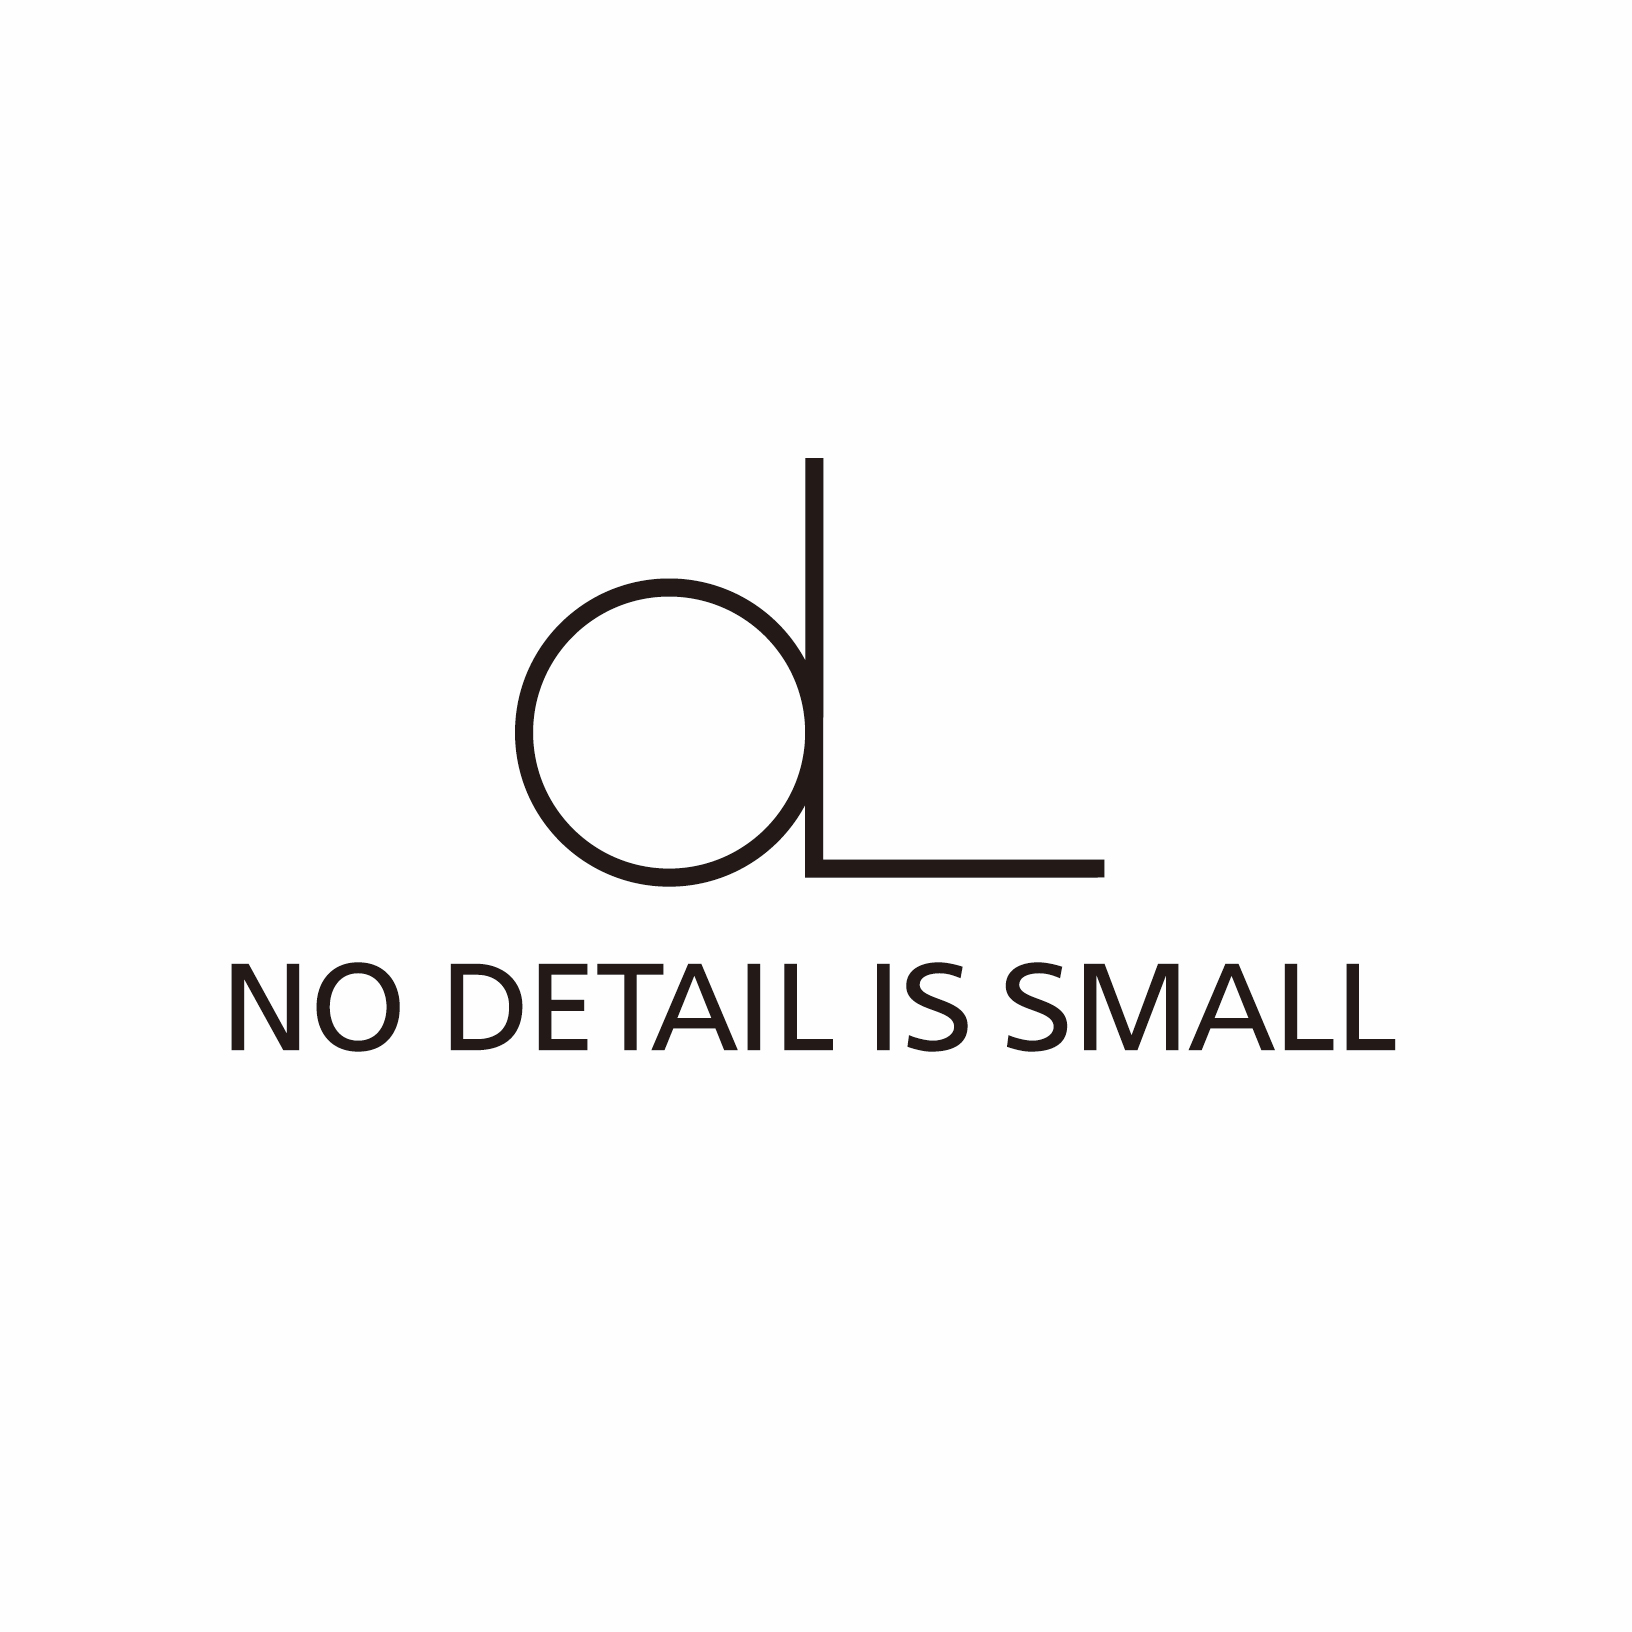 NO DETAIL IS SMALL